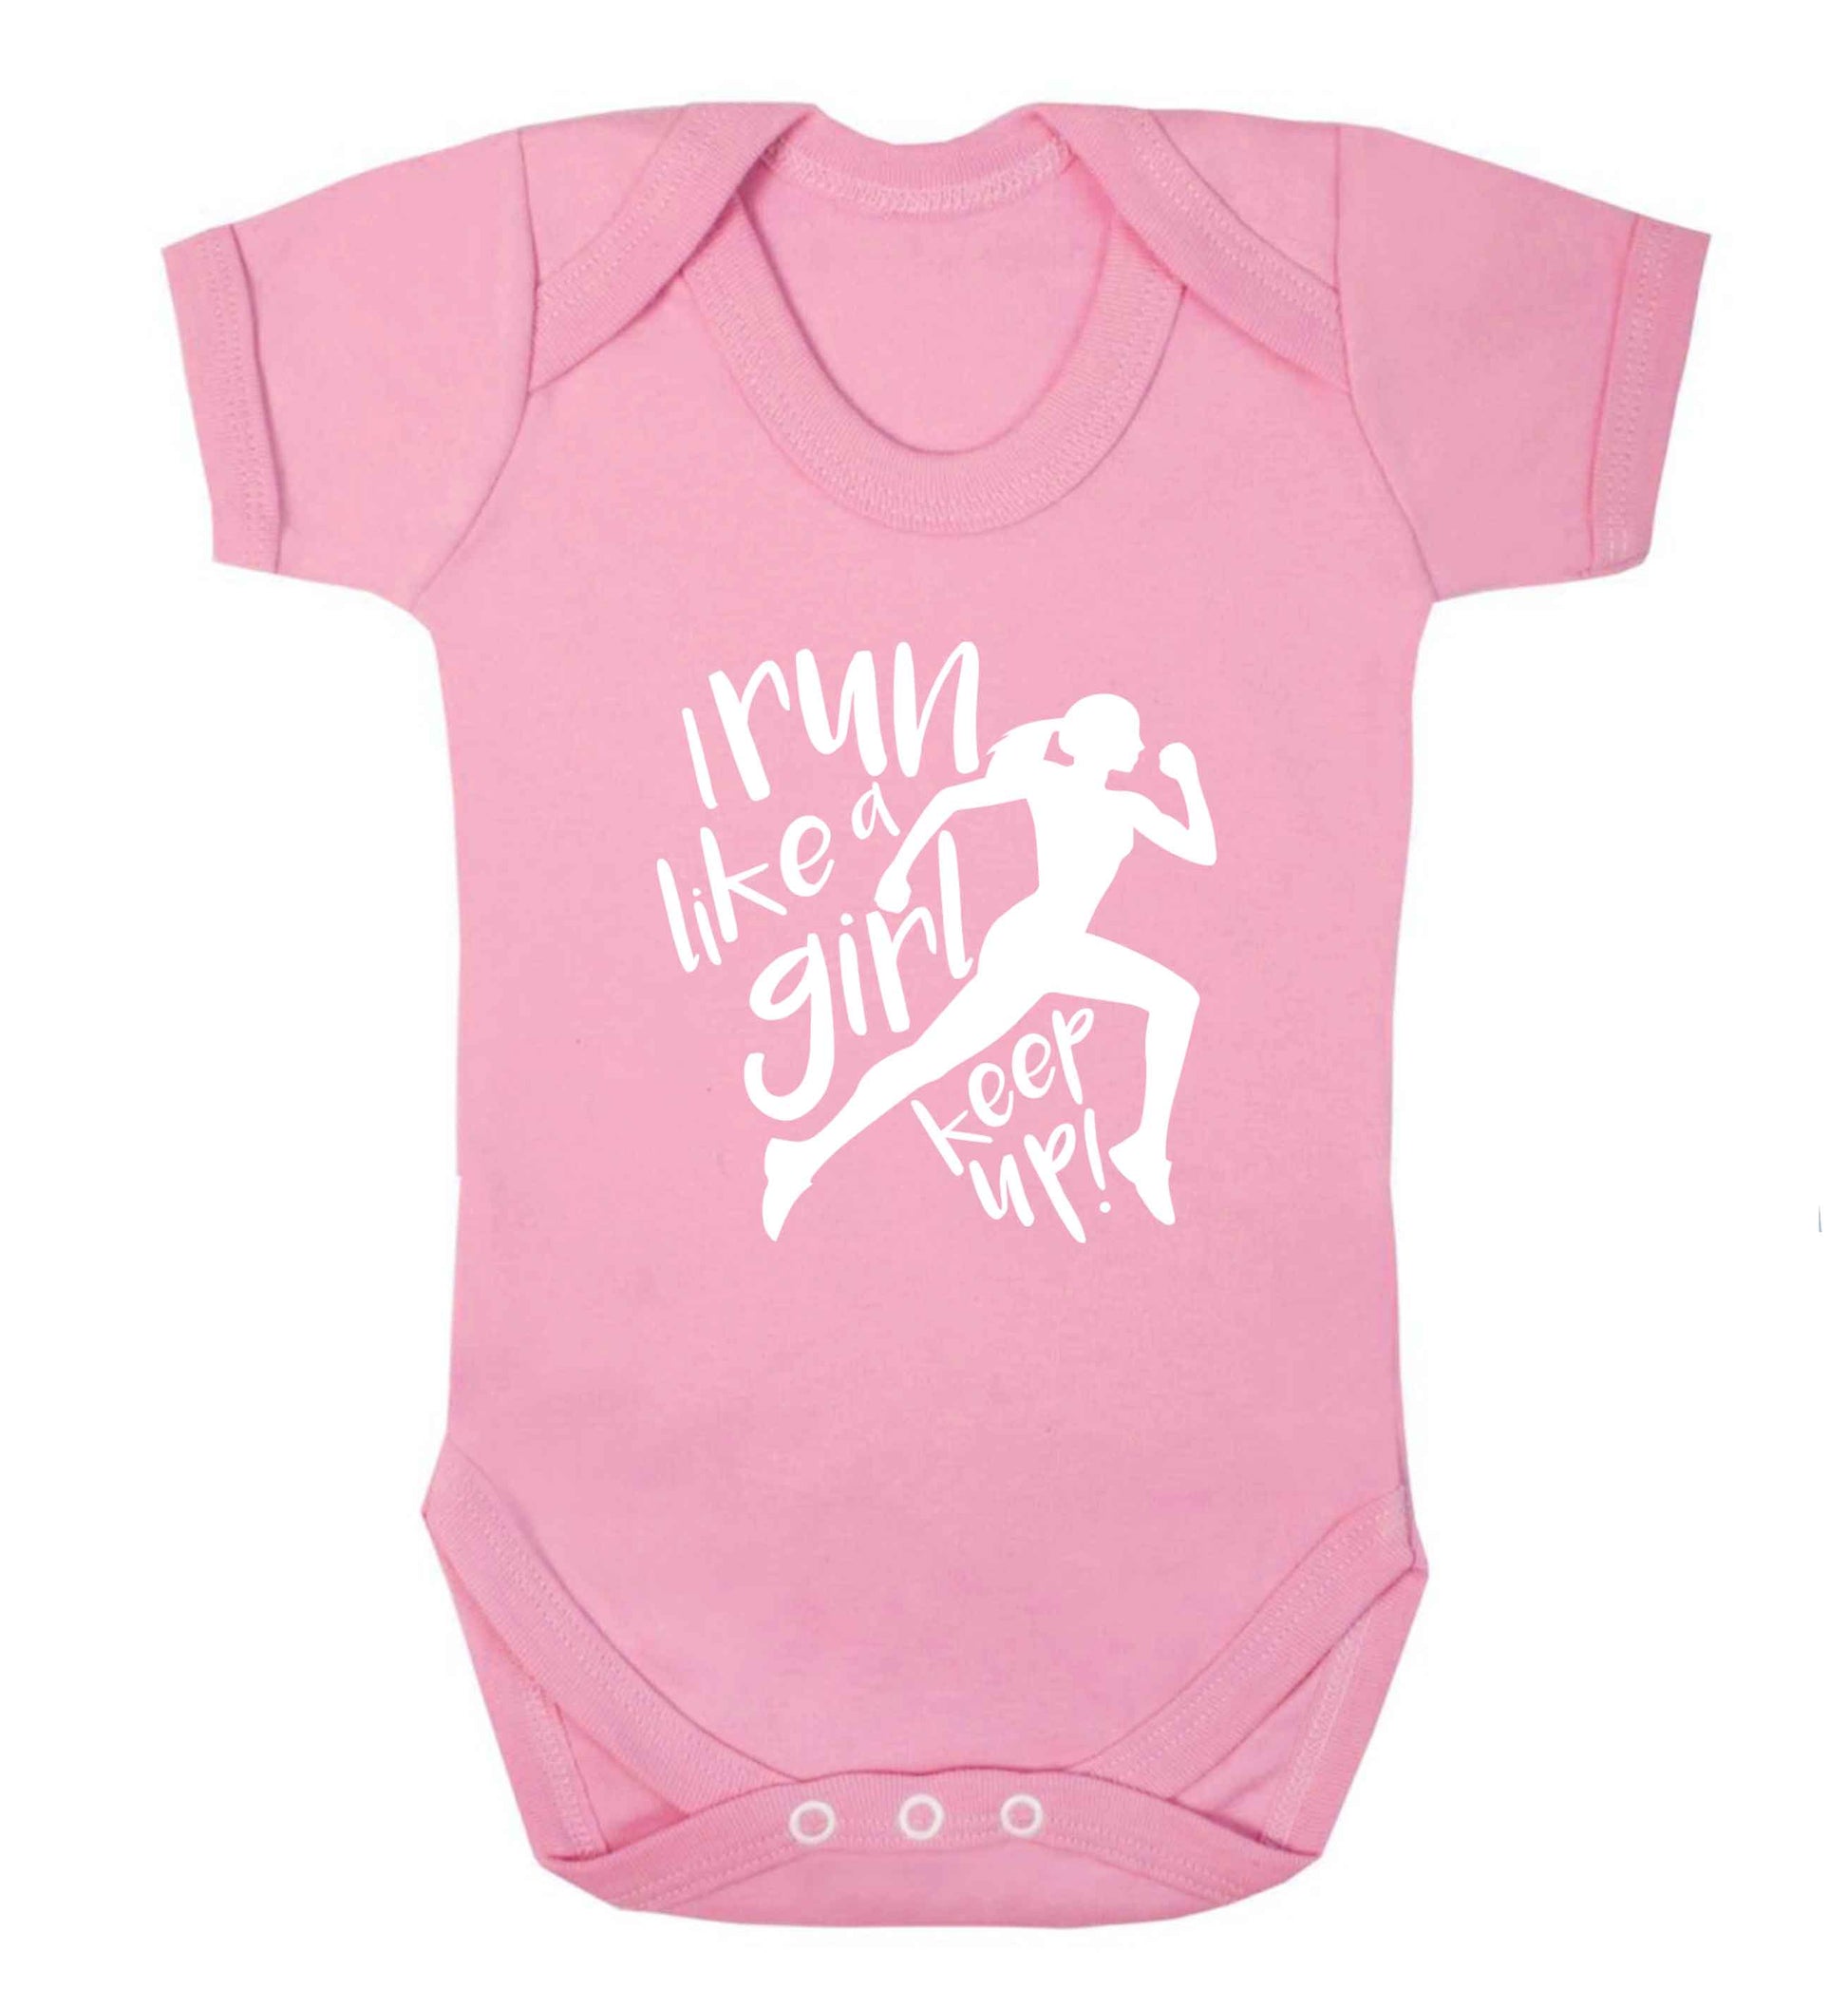 I run like a girl, keep up! baby vest pale pink 18-24 months